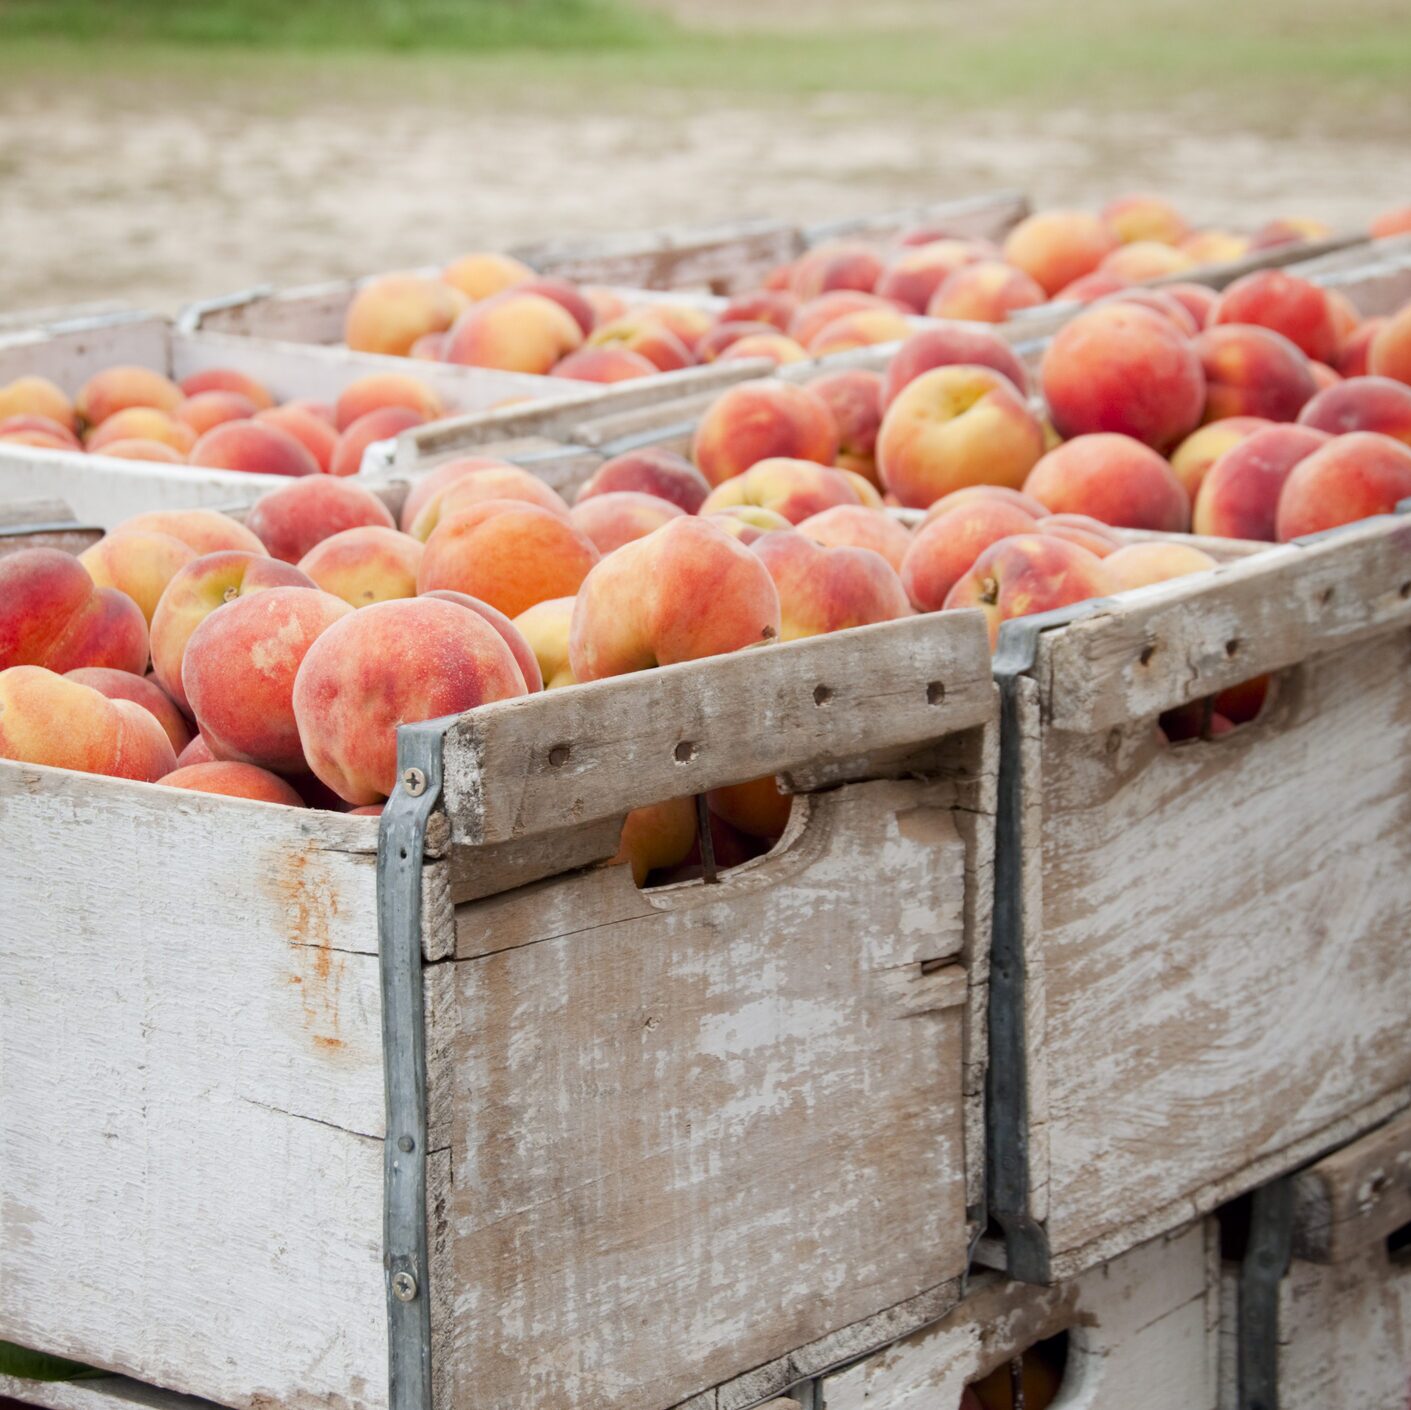 Image shows 3 crates full of peaches. 